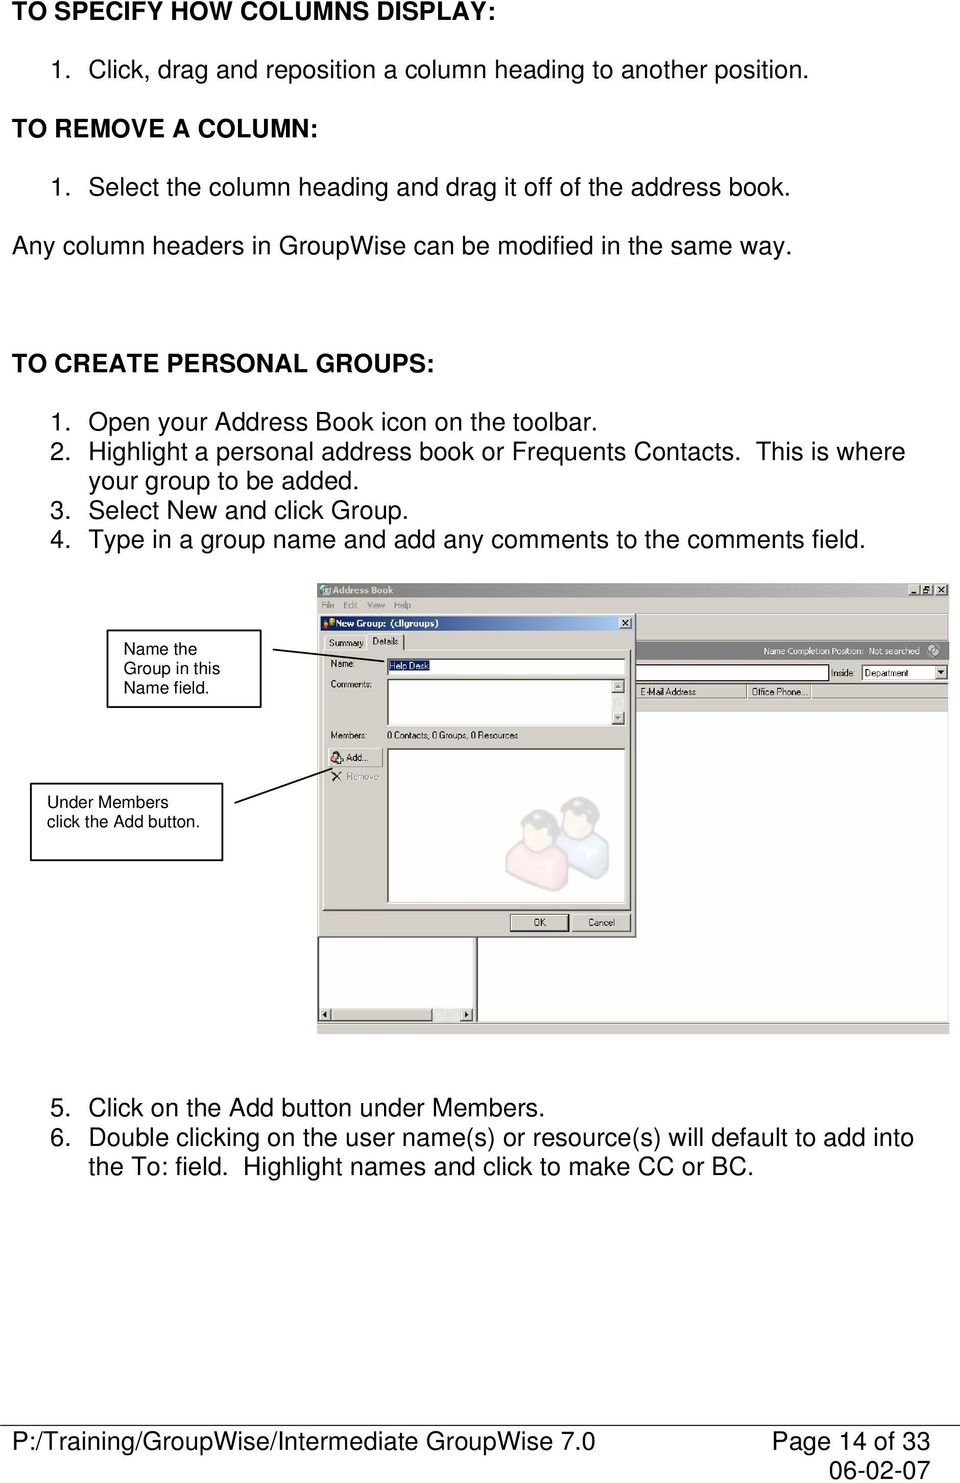 This is where your group to be added. 3. Select New and click Group. 4. Type in a group name and add any comments to the comments field. Name the Group in this Name field.